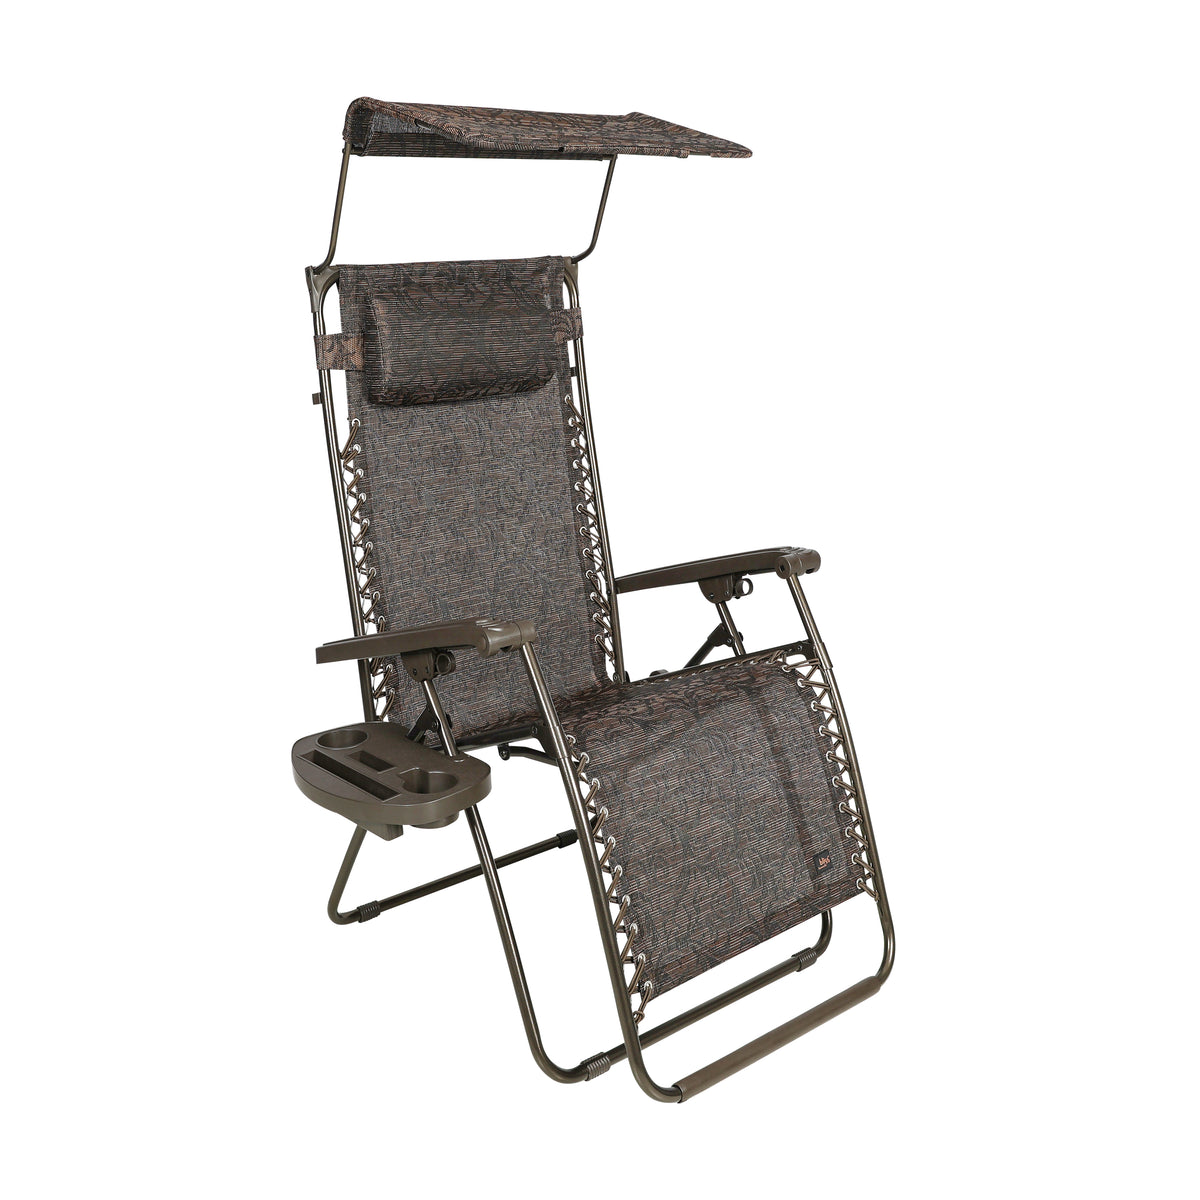 Bliss Hammocks 26-inch Wide Zero Gravity Chair with Canopy, Pillow, and Drink Tray in the brown jacquard variation.